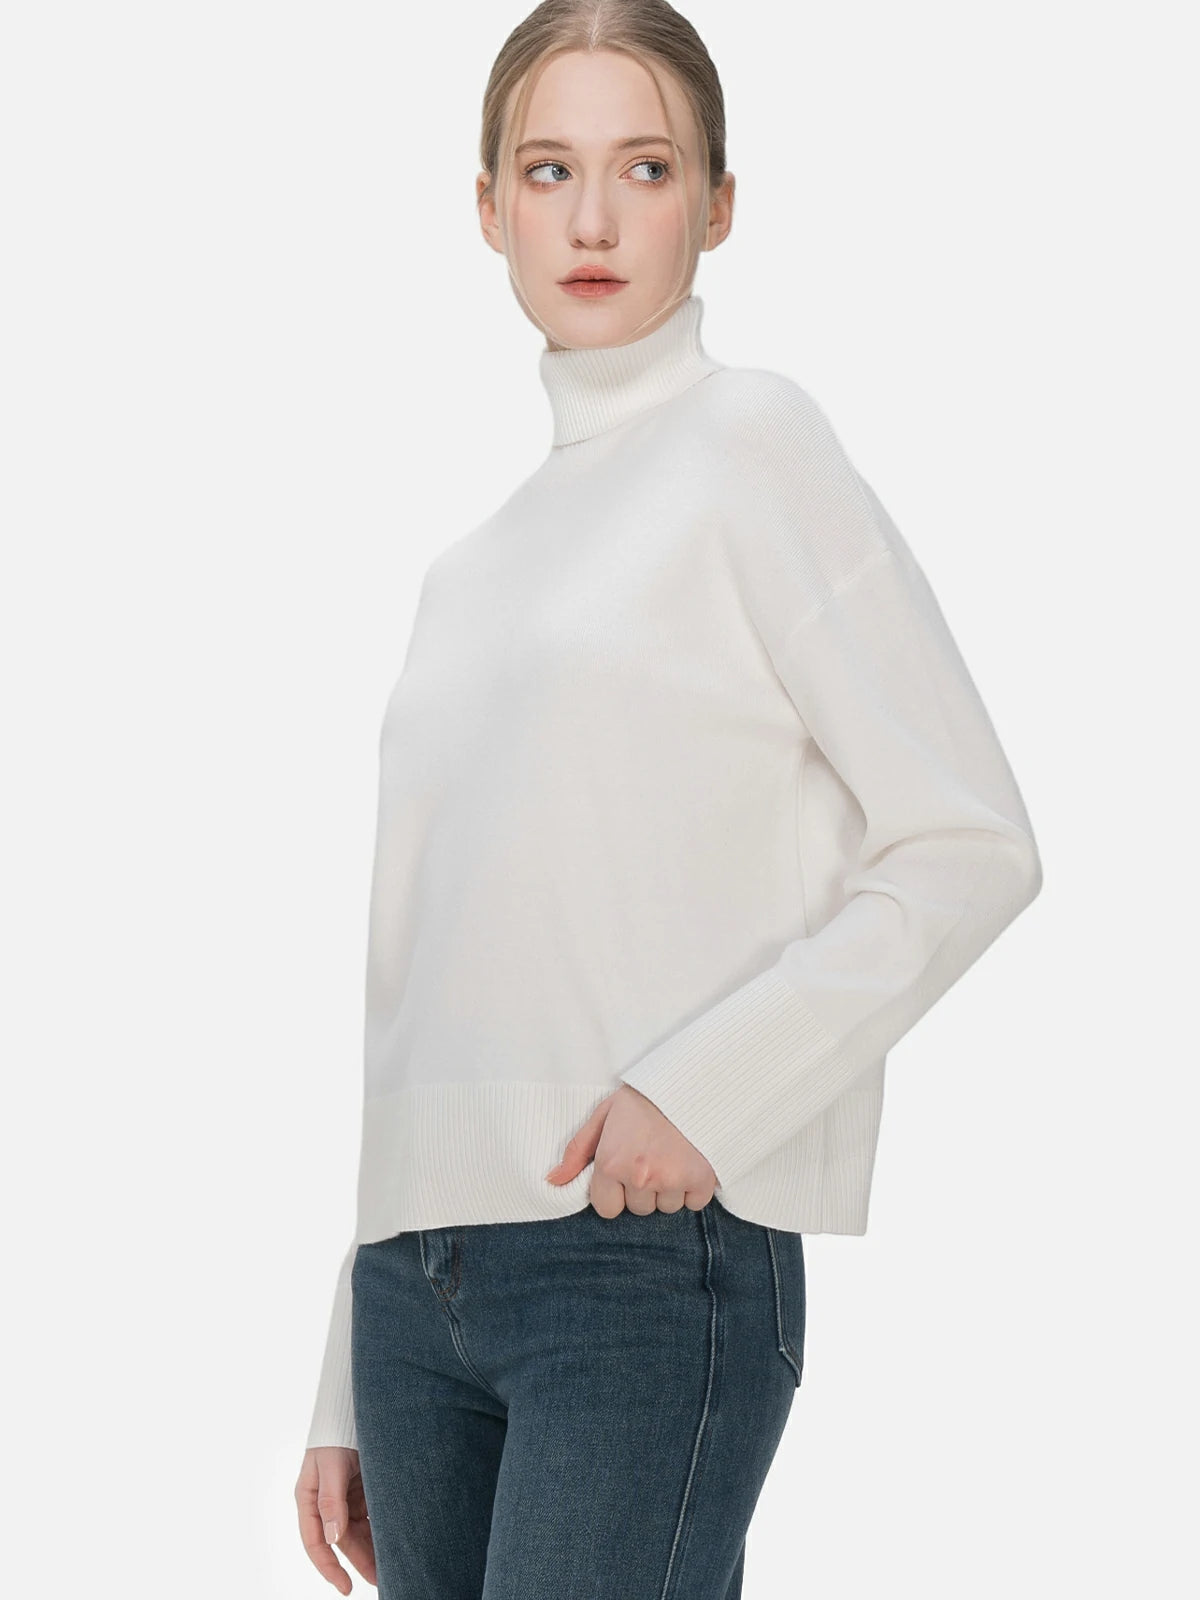 Make a fashion statement with this classic and contemporary white turtleneck sweater, adorned with a turtleneck design and a snug fit.